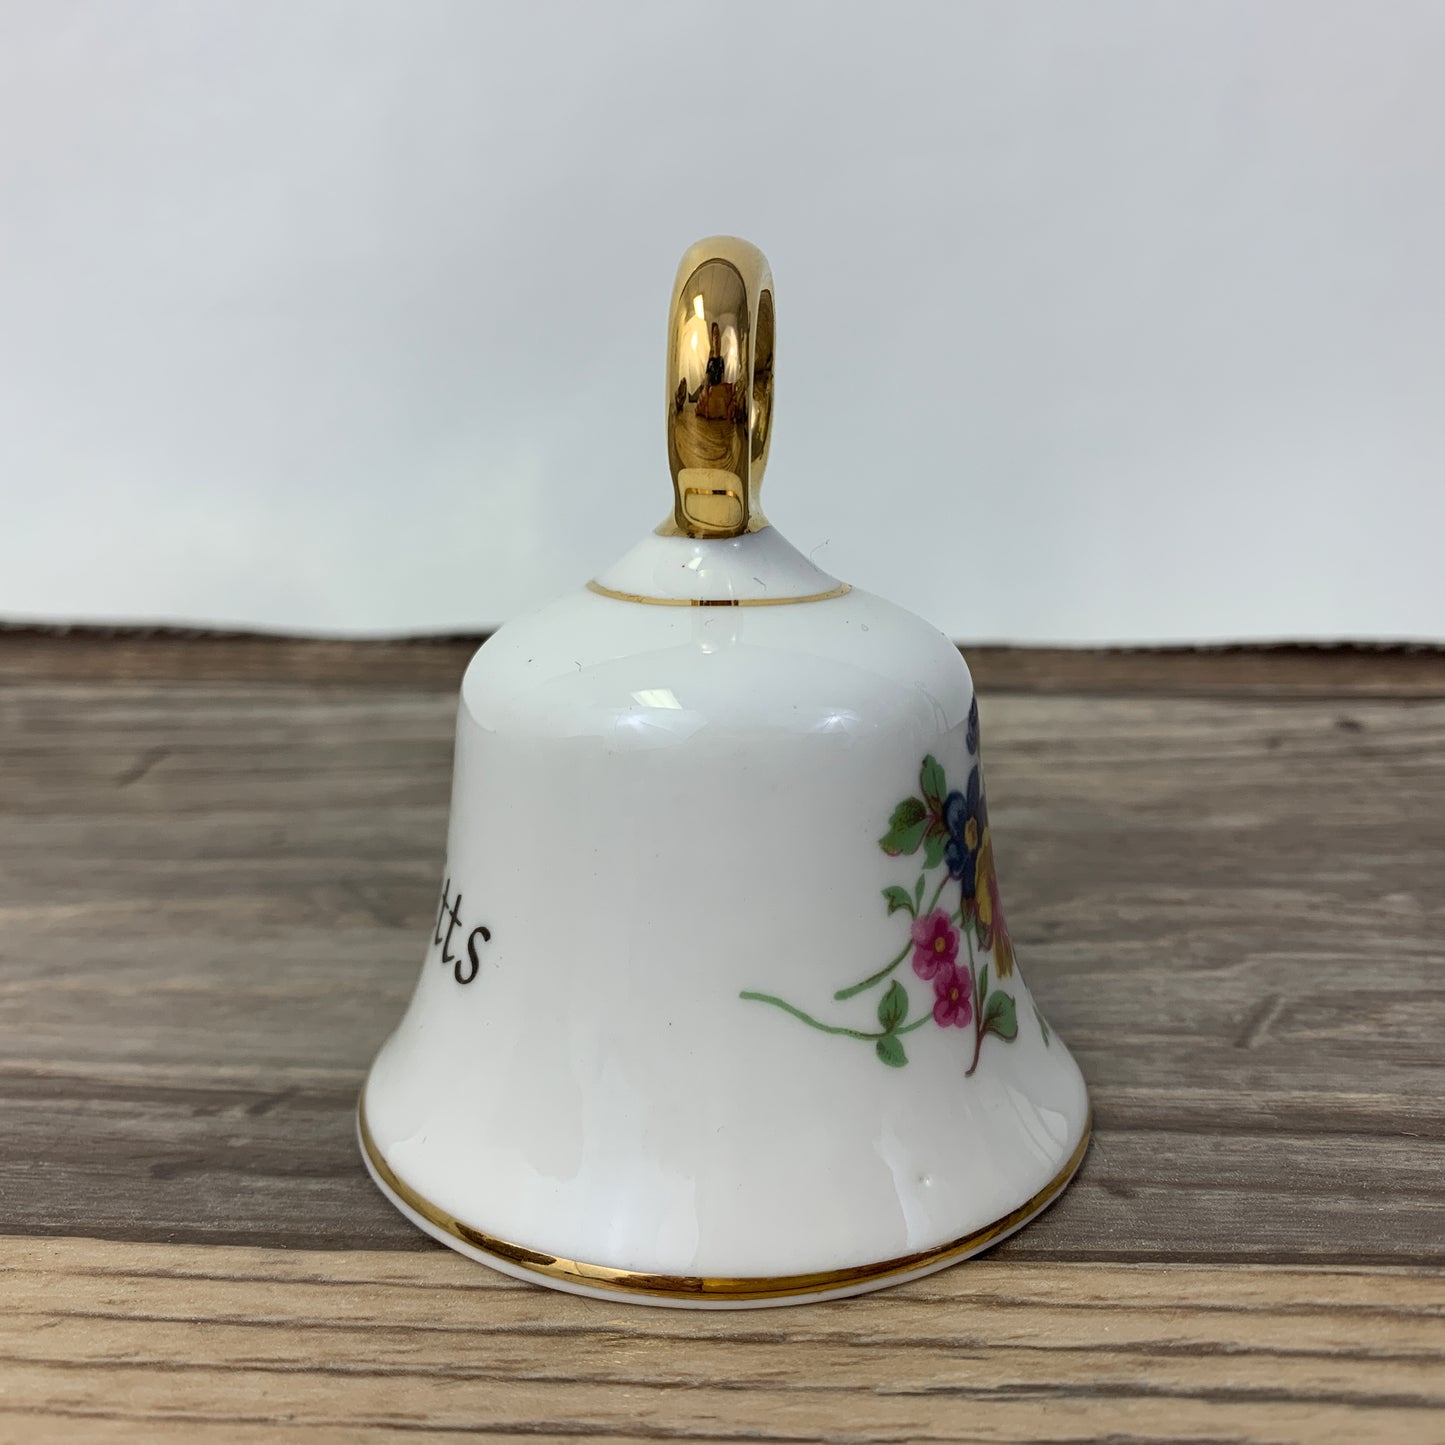 Vintage China Bell with Floral Pattern Vintage Travel Souvenir St Kitts Bell